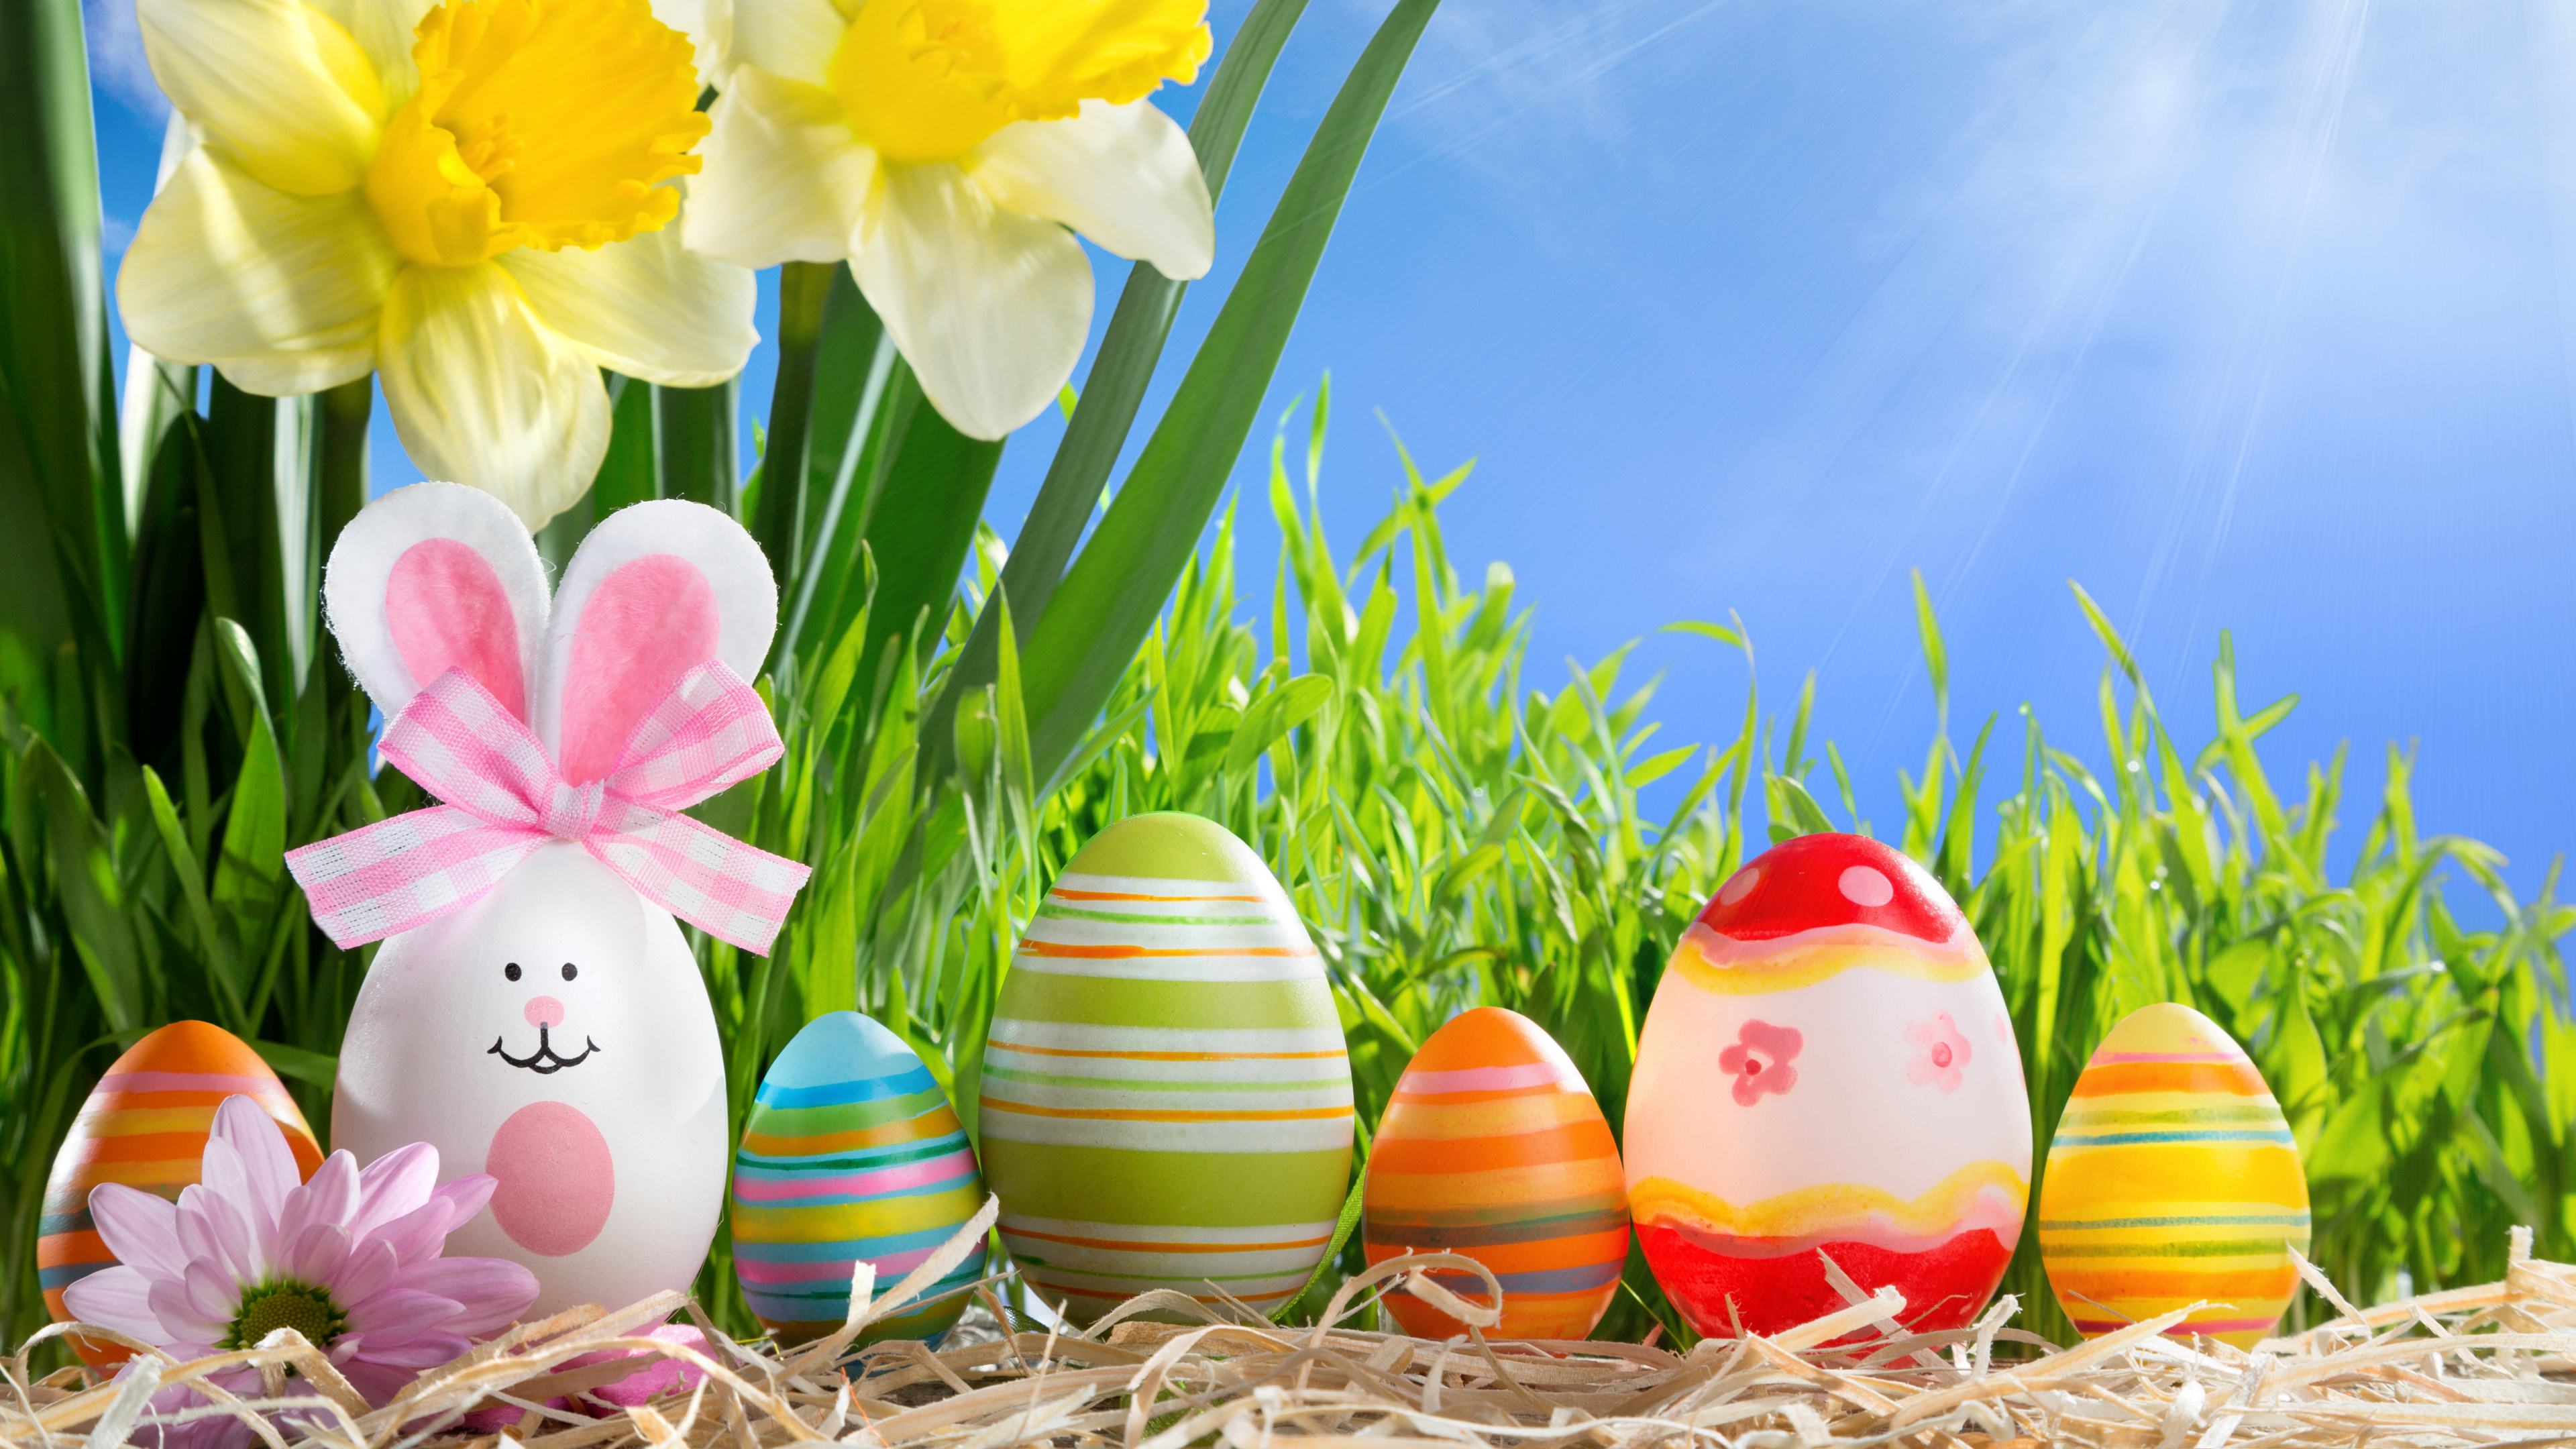 Easter Egg, Spring, Holiday, Easter, Grass. Wallpaper in 3840x2160 Resolution